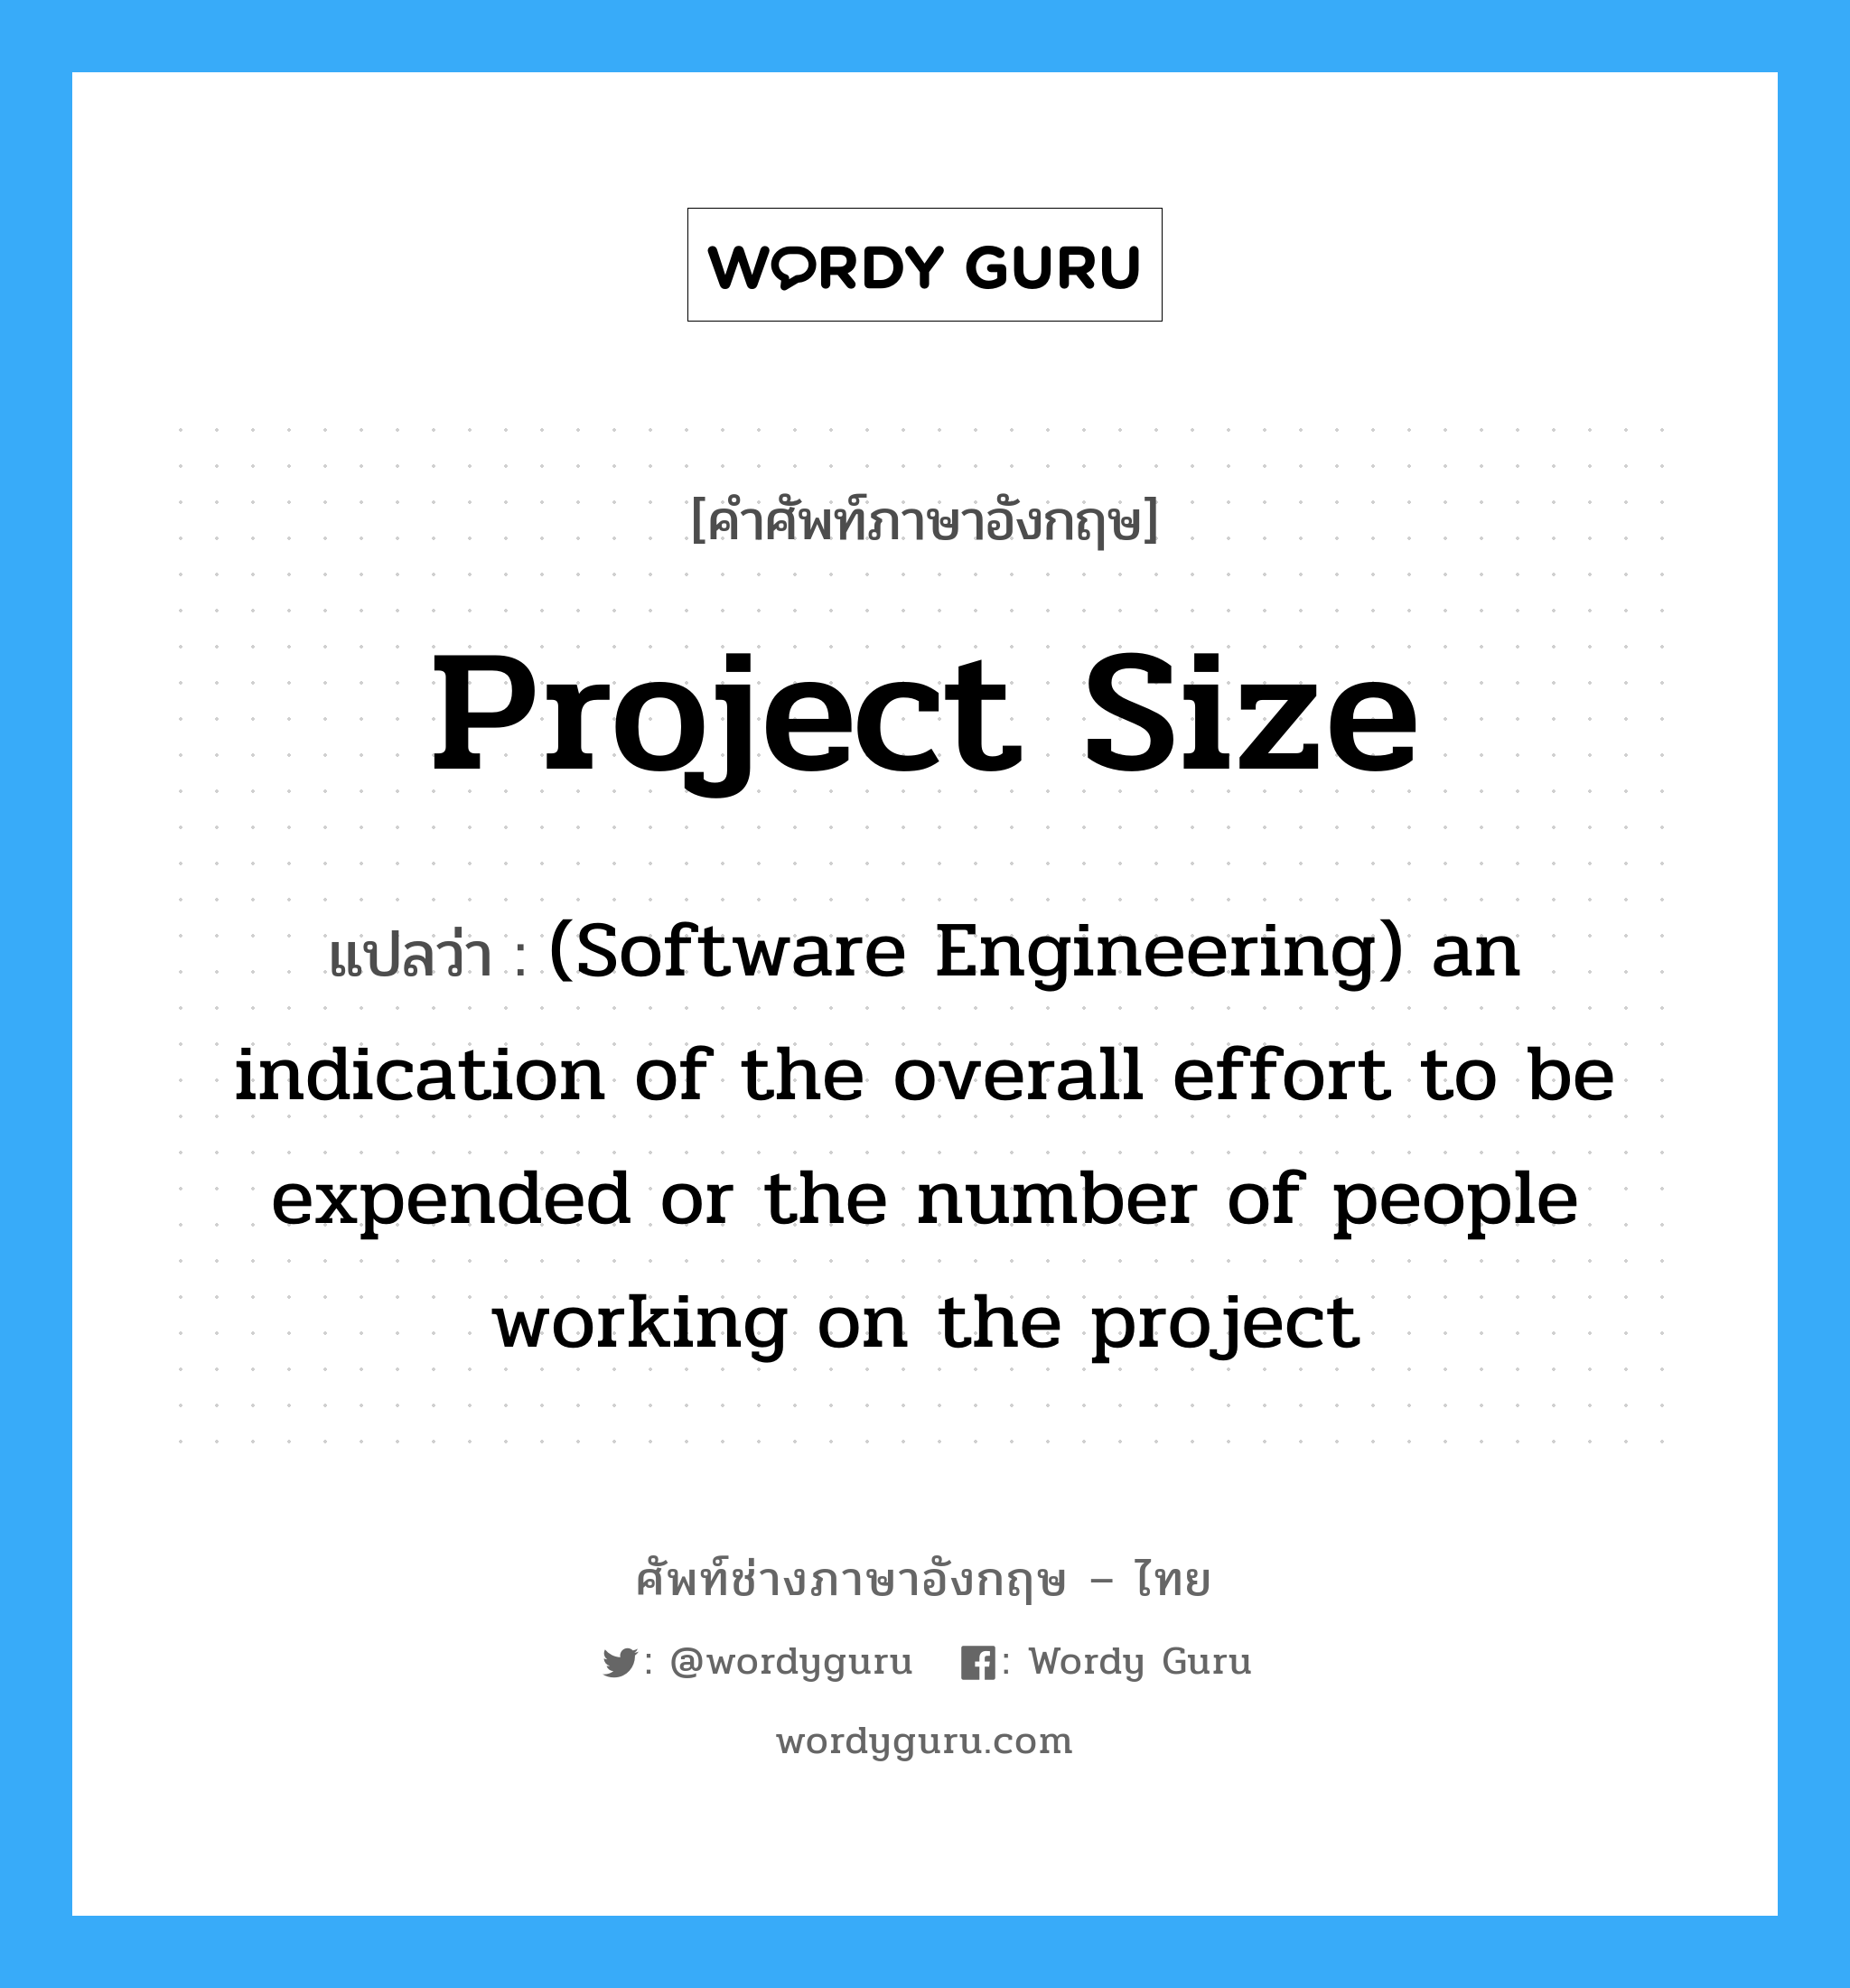 Project size แปลว่า?, คำศัพท์ช่างภาษาอังกฤษ - ไทย Project size คำศัพท์ภาษาอังกฤษ Project size แปลว่า (Software Engineering) an indication of the overall effort to be expended or the number of people working on the project